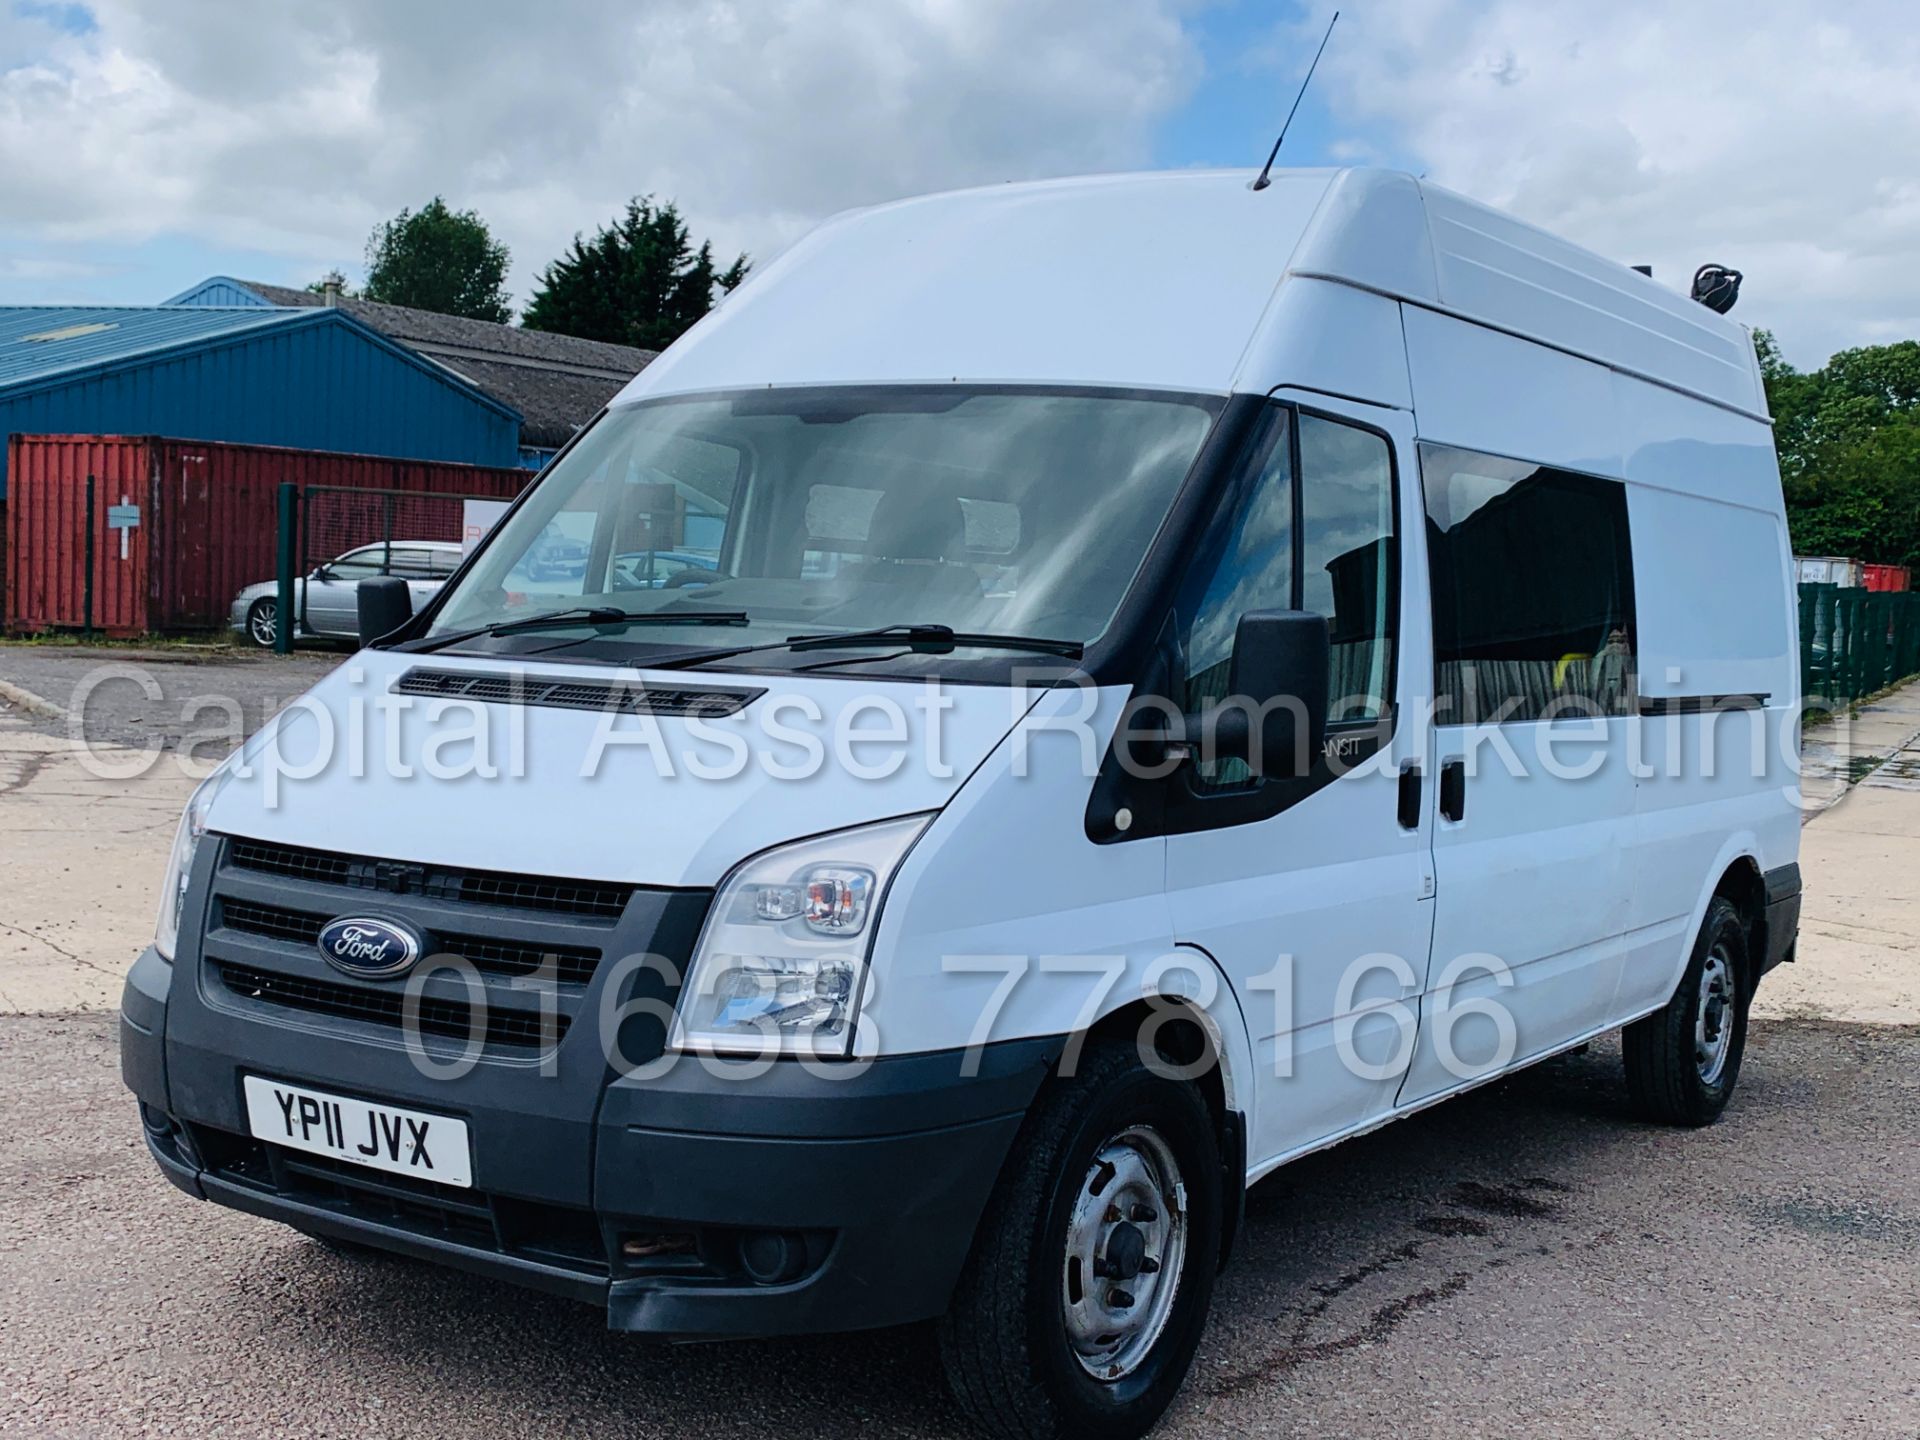 (On Sale) FORD TRANSIT T350L *CLARKS CONVERSION - LWB MESSING UNIT* (2011) '2.4 TDCI' (1 OWNER) - Image 2 of 41